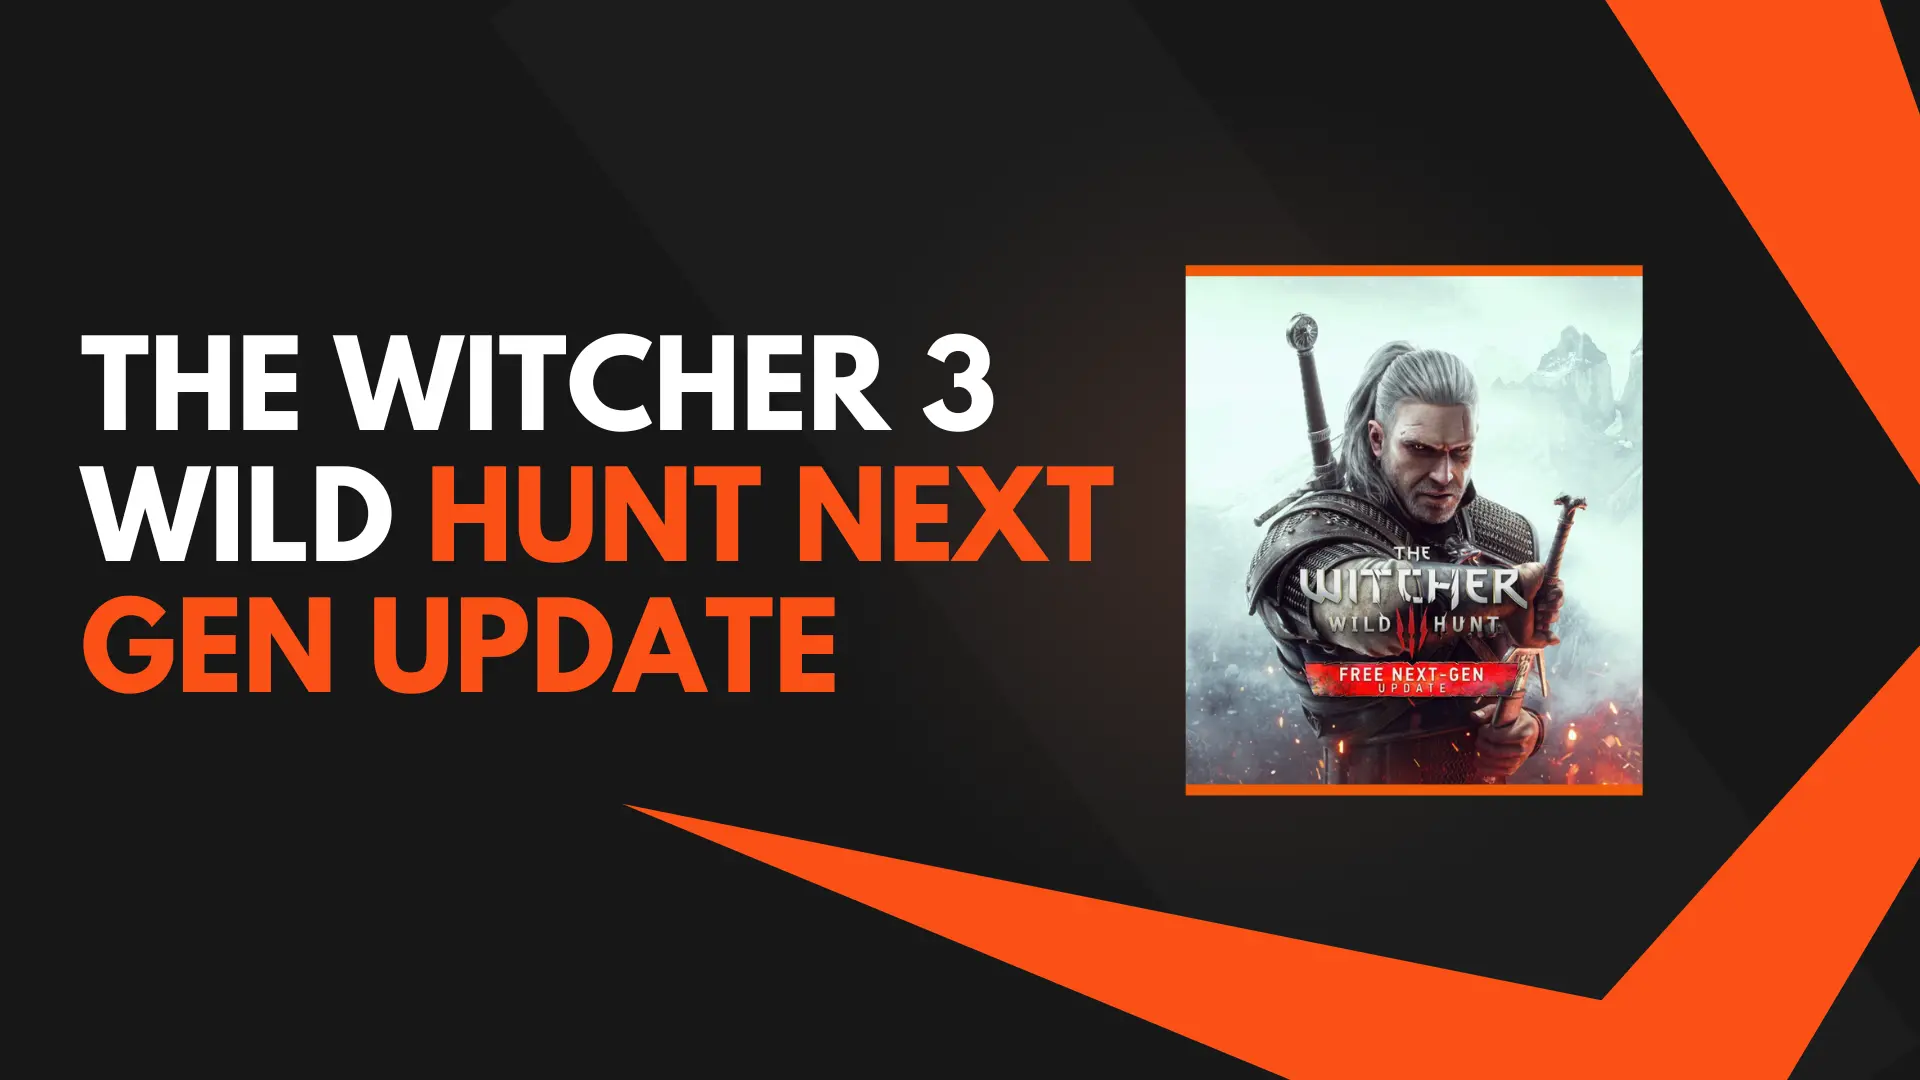 The Witcher 3 Wild Hunt Next Gen Update Everything You Need to Know